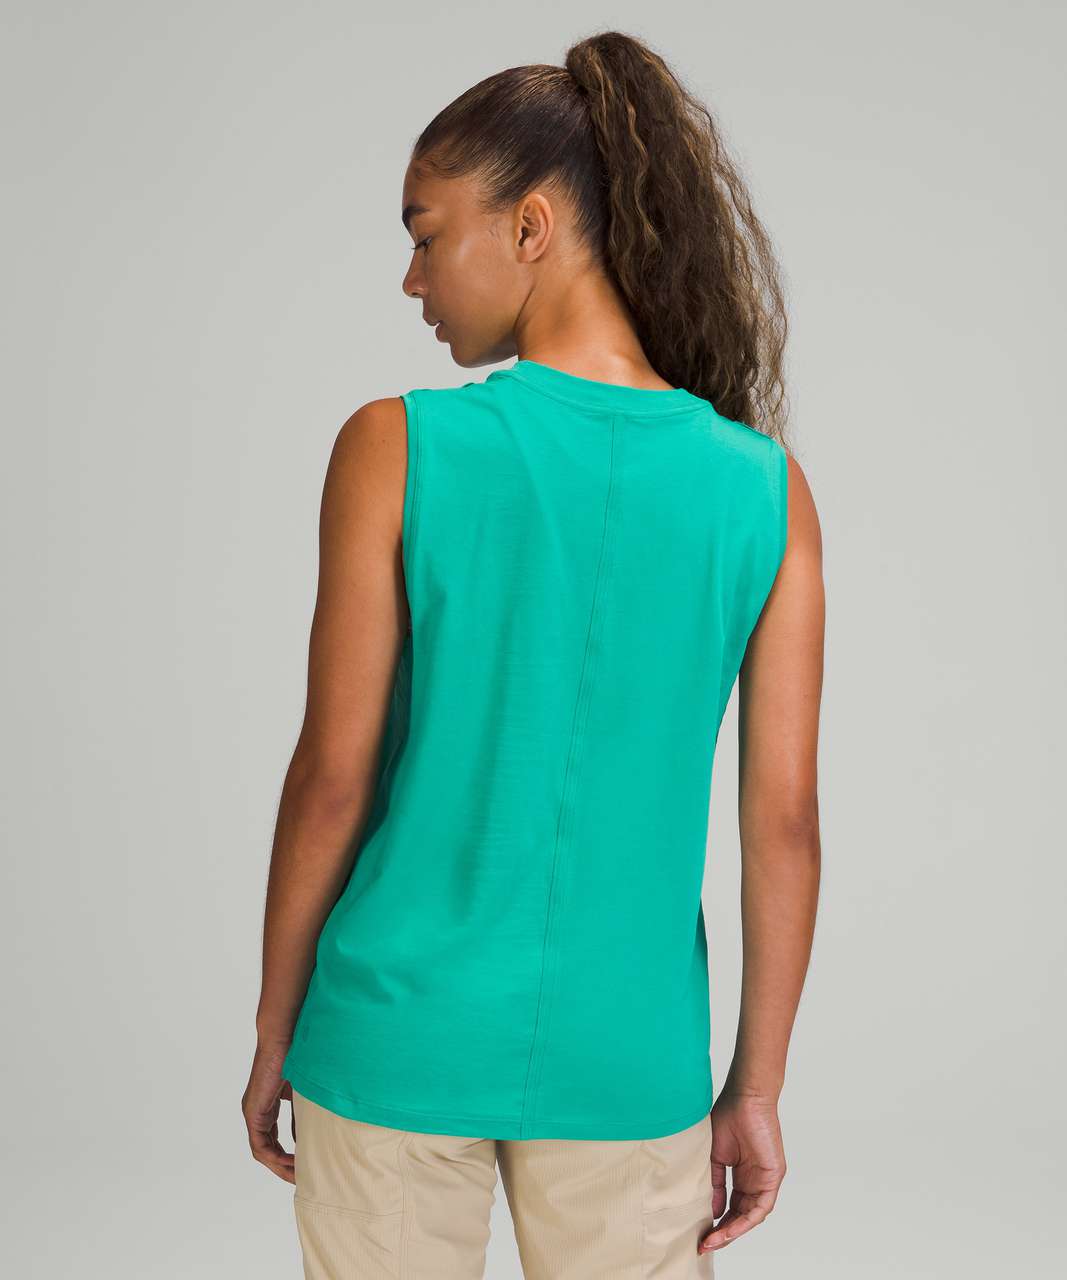 Lululemon All Yours Tank Top - Maldives Green